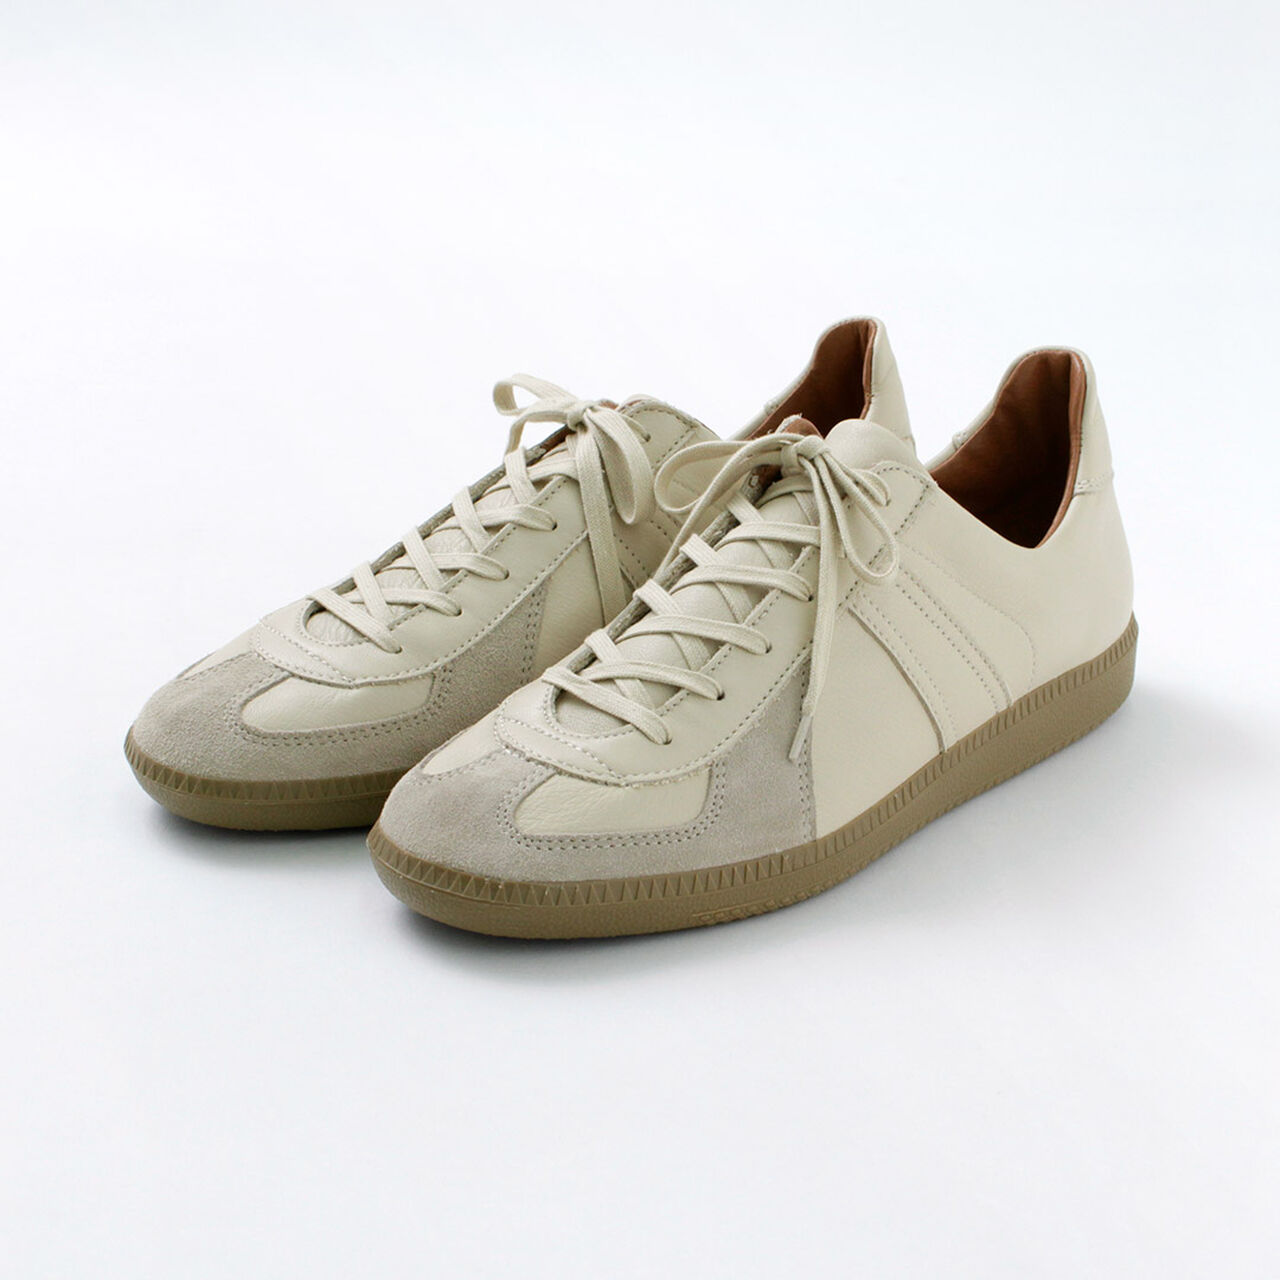 Reproduction of Found Skate German Army Trainer - Beige on Garmentory